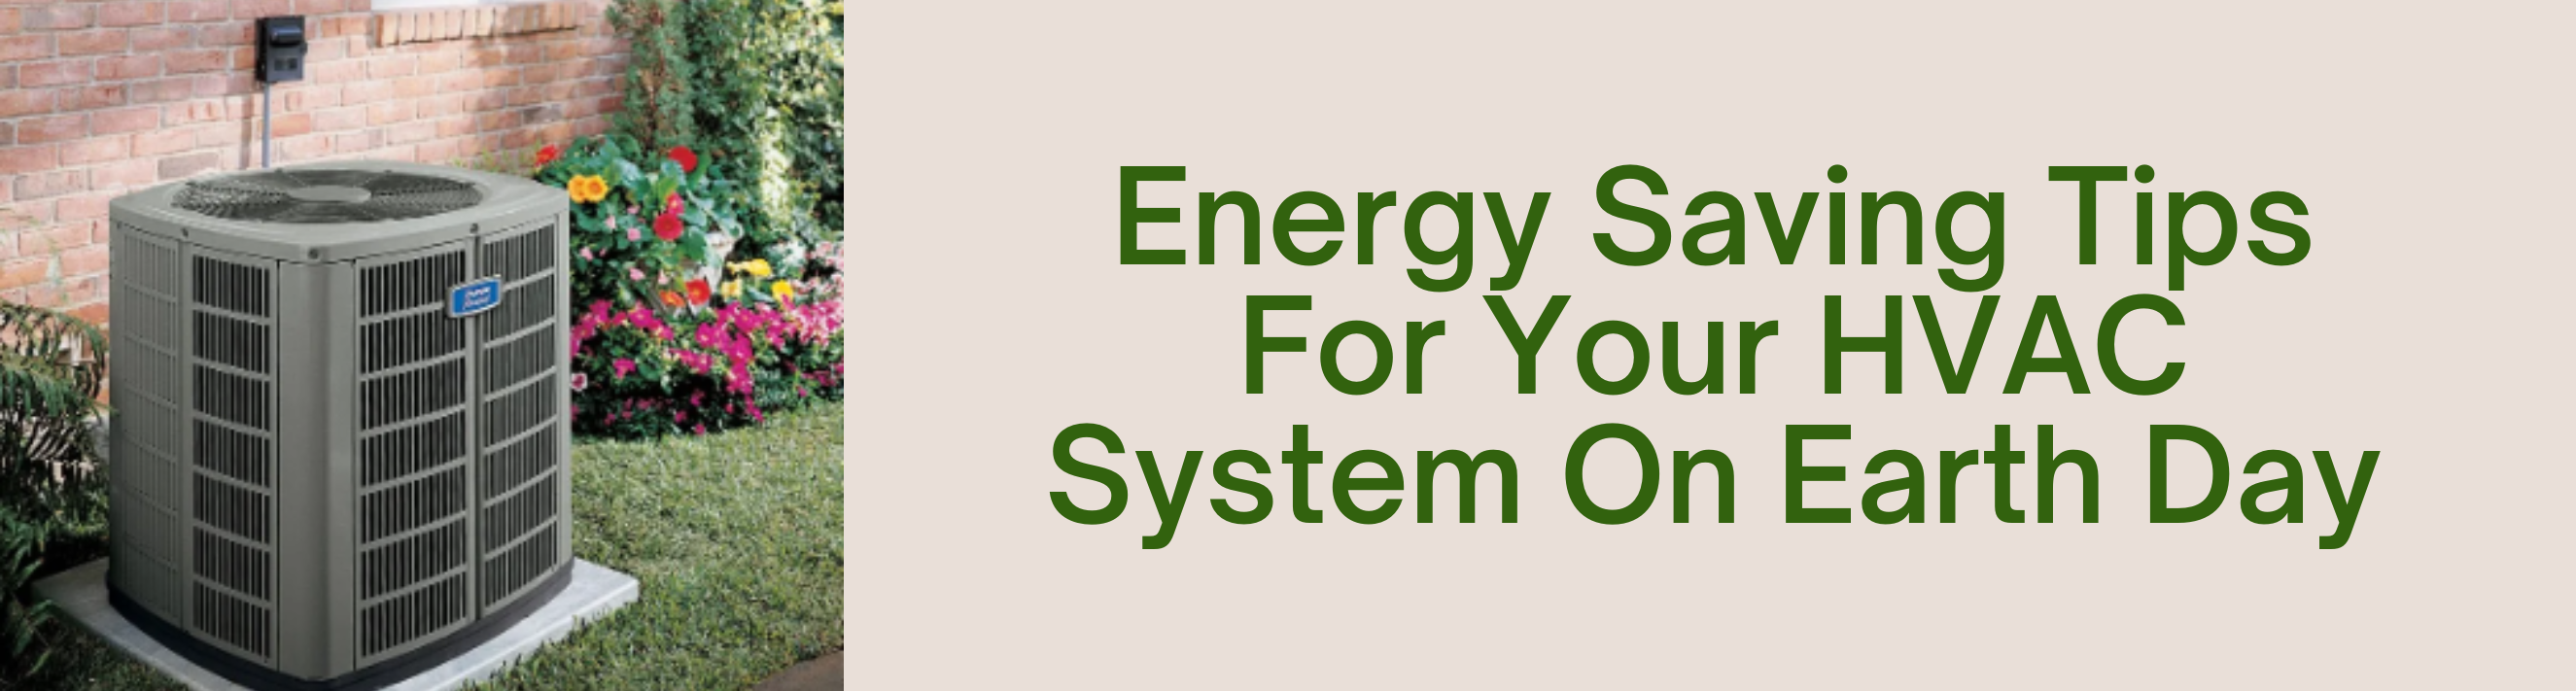 Image for Energy Saving Tips For Your HVAC System On Earth Day